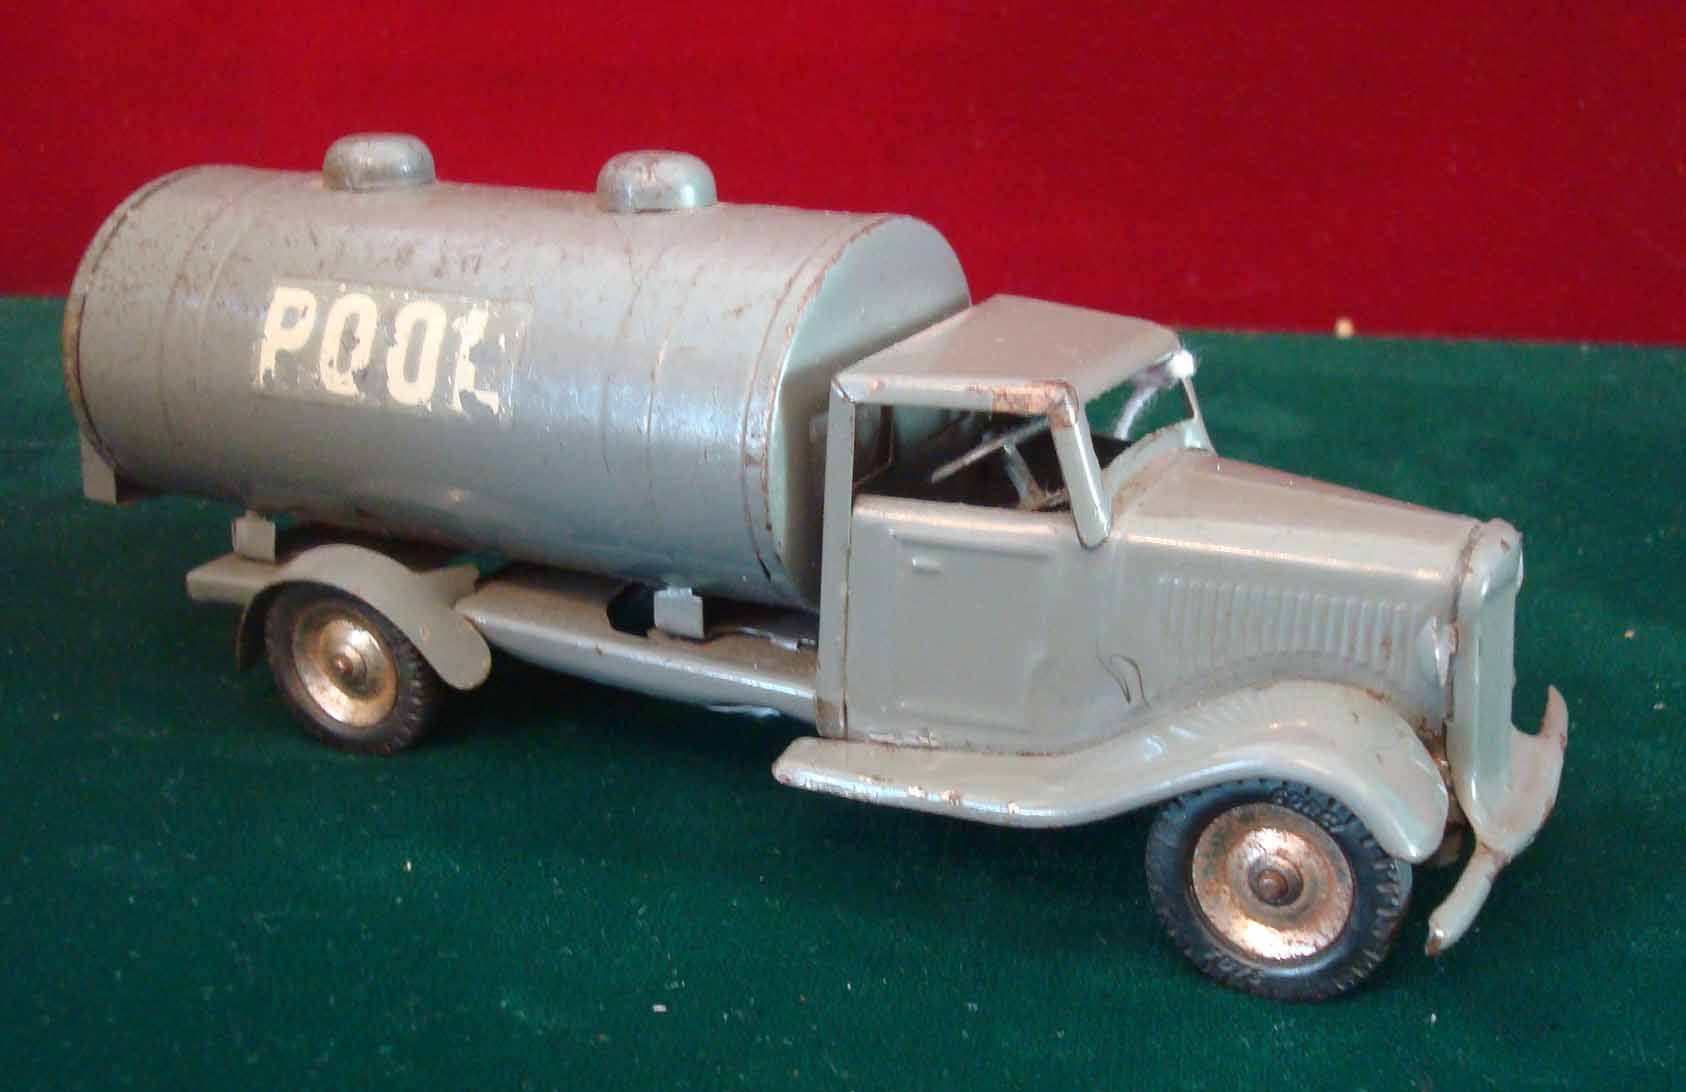 Triang Minic No.78M 4-wheeled " Pool" Wartime Tanker: Scarce example released for a short period